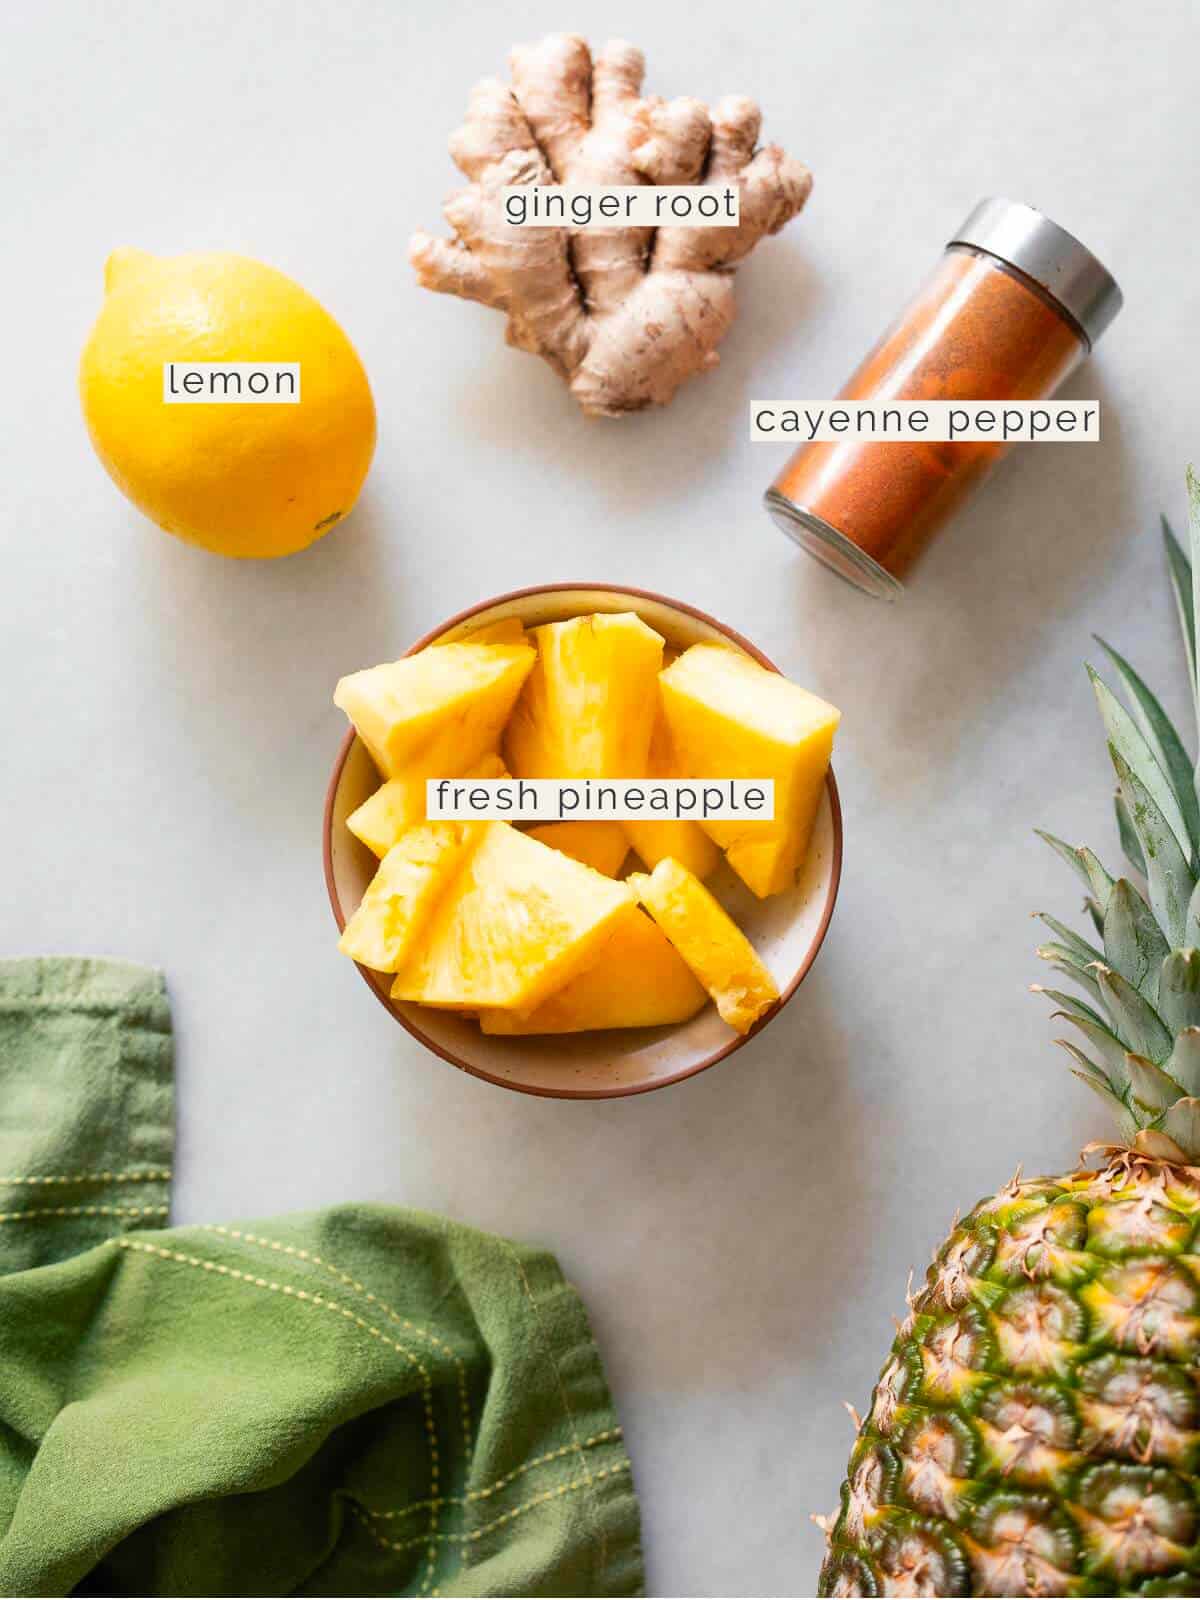 labeled ingredients to make pineapple juice for sore throat.